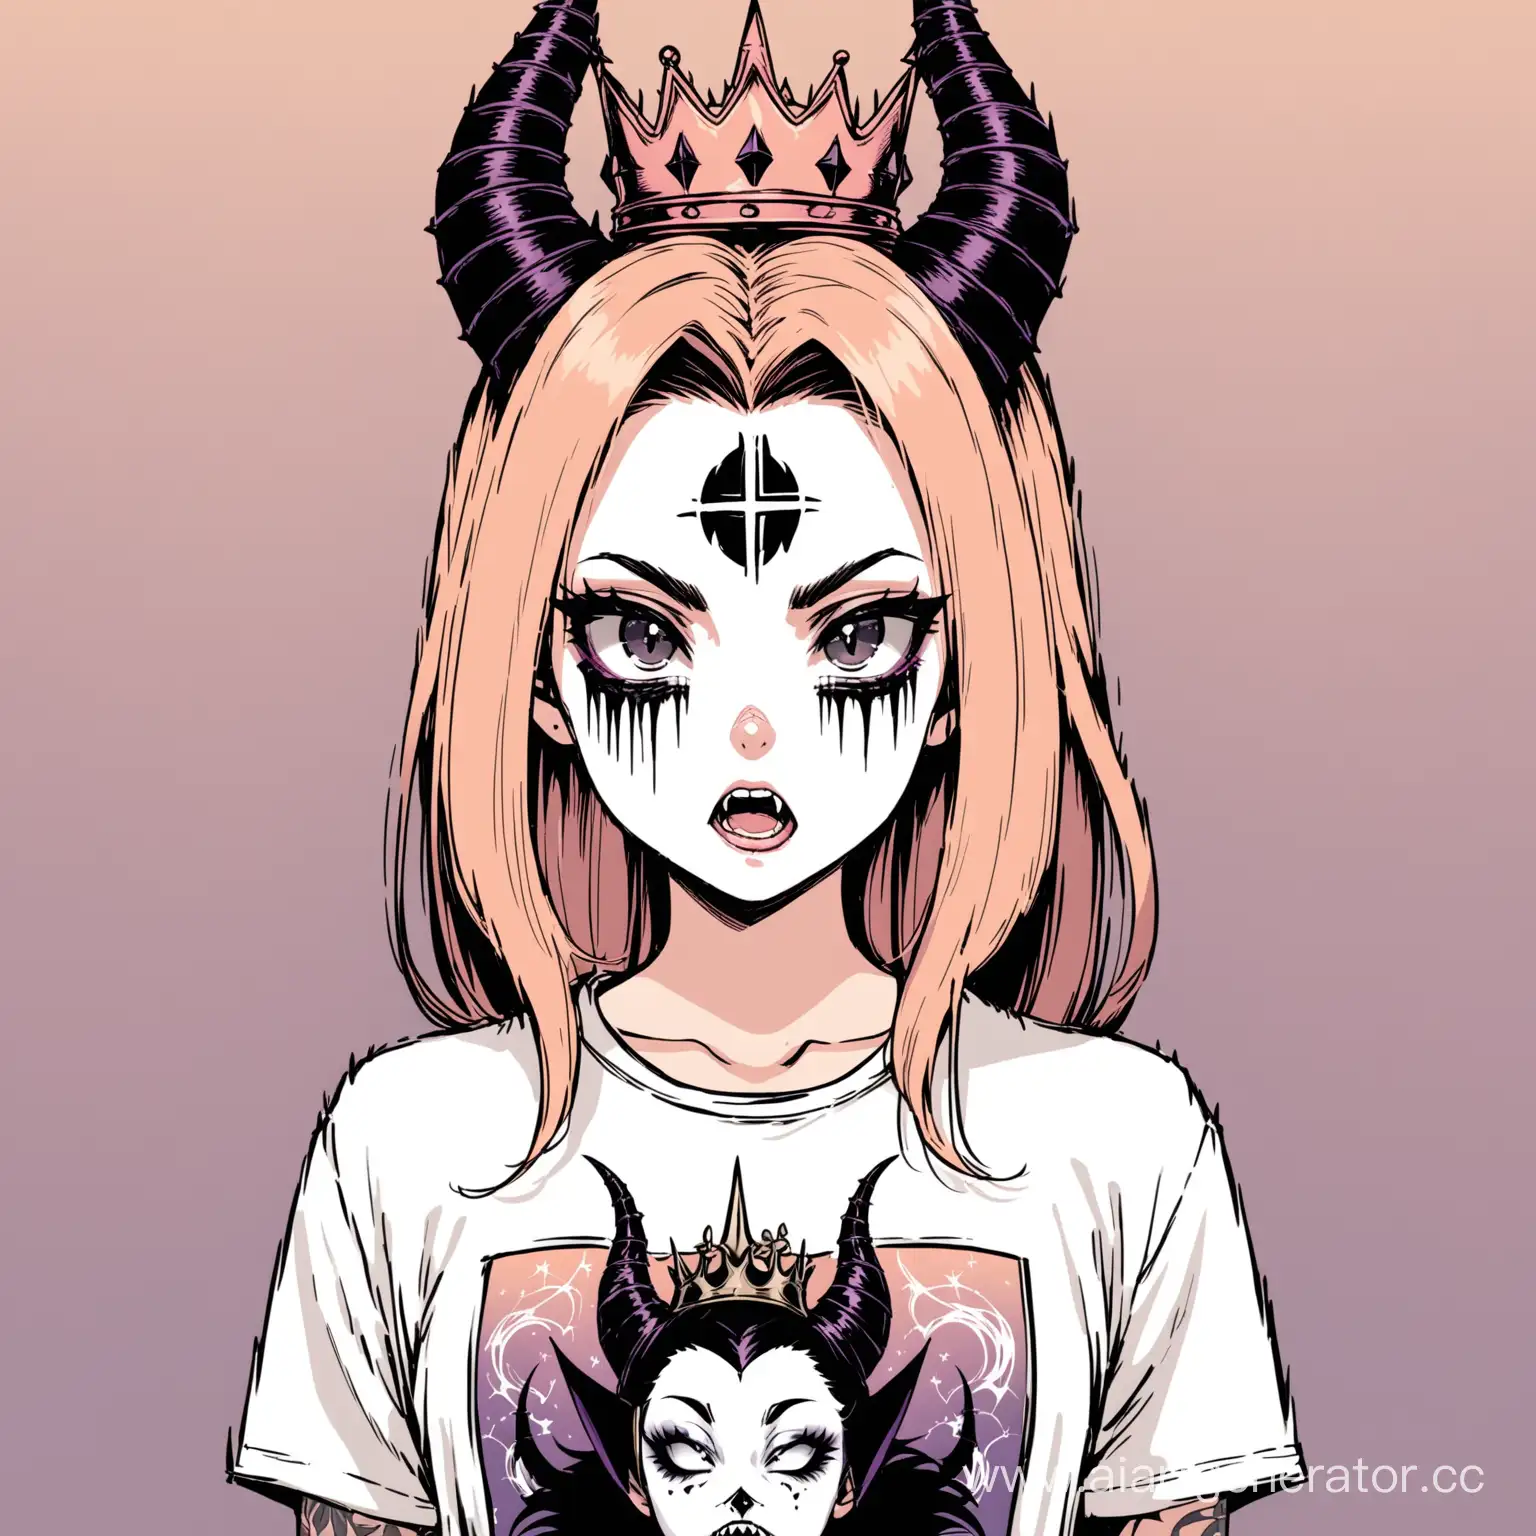 Ethereal-Gothic-Girl-with-Cross-Tattoo-and-Maleficent-Horns-Crown